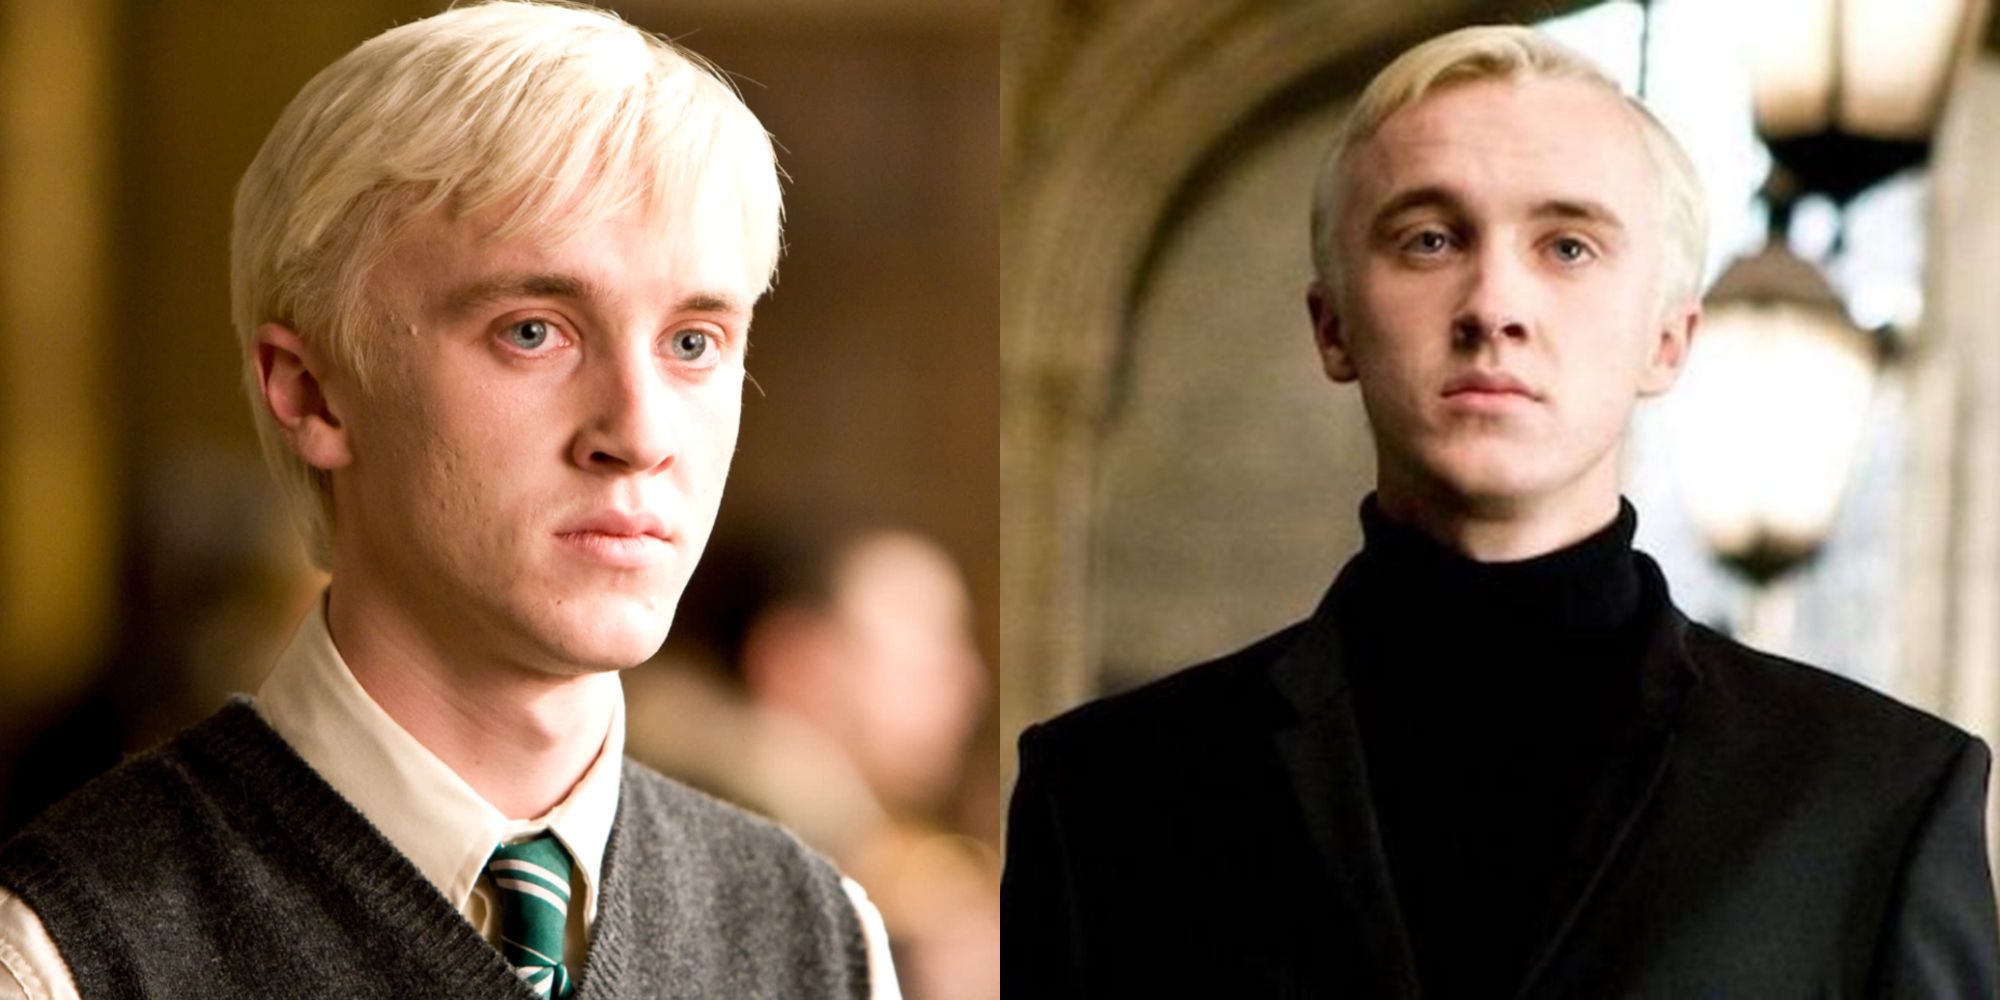 Split image showing Draco Malfoy looking serious in Harry Potter.